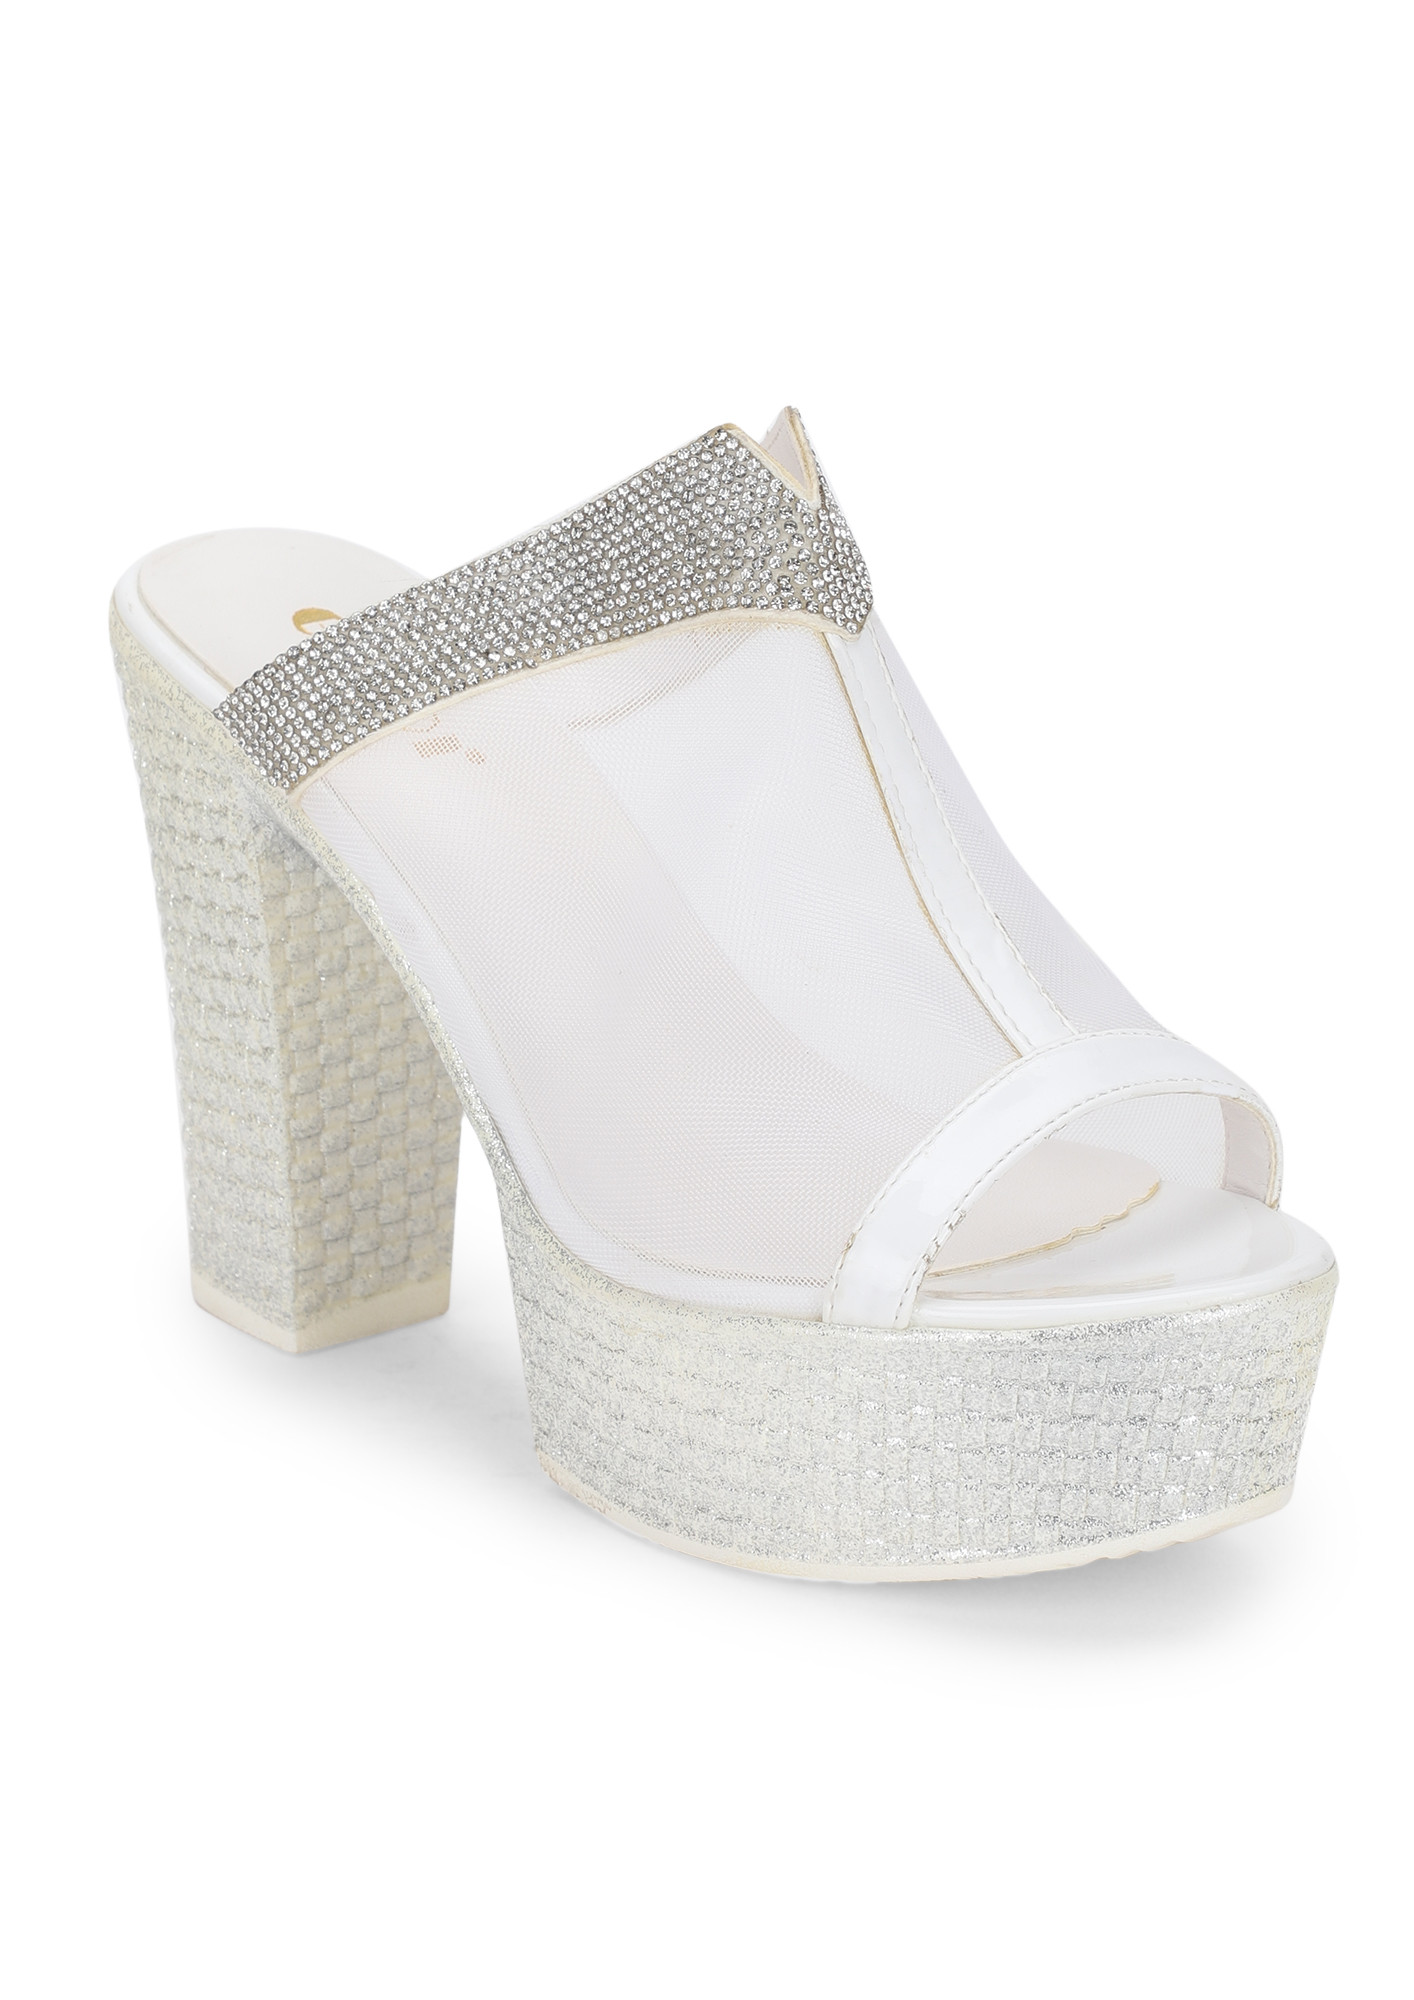 GET SOME CLARITY HERE WHITE PLATFORM PEEP-TOES